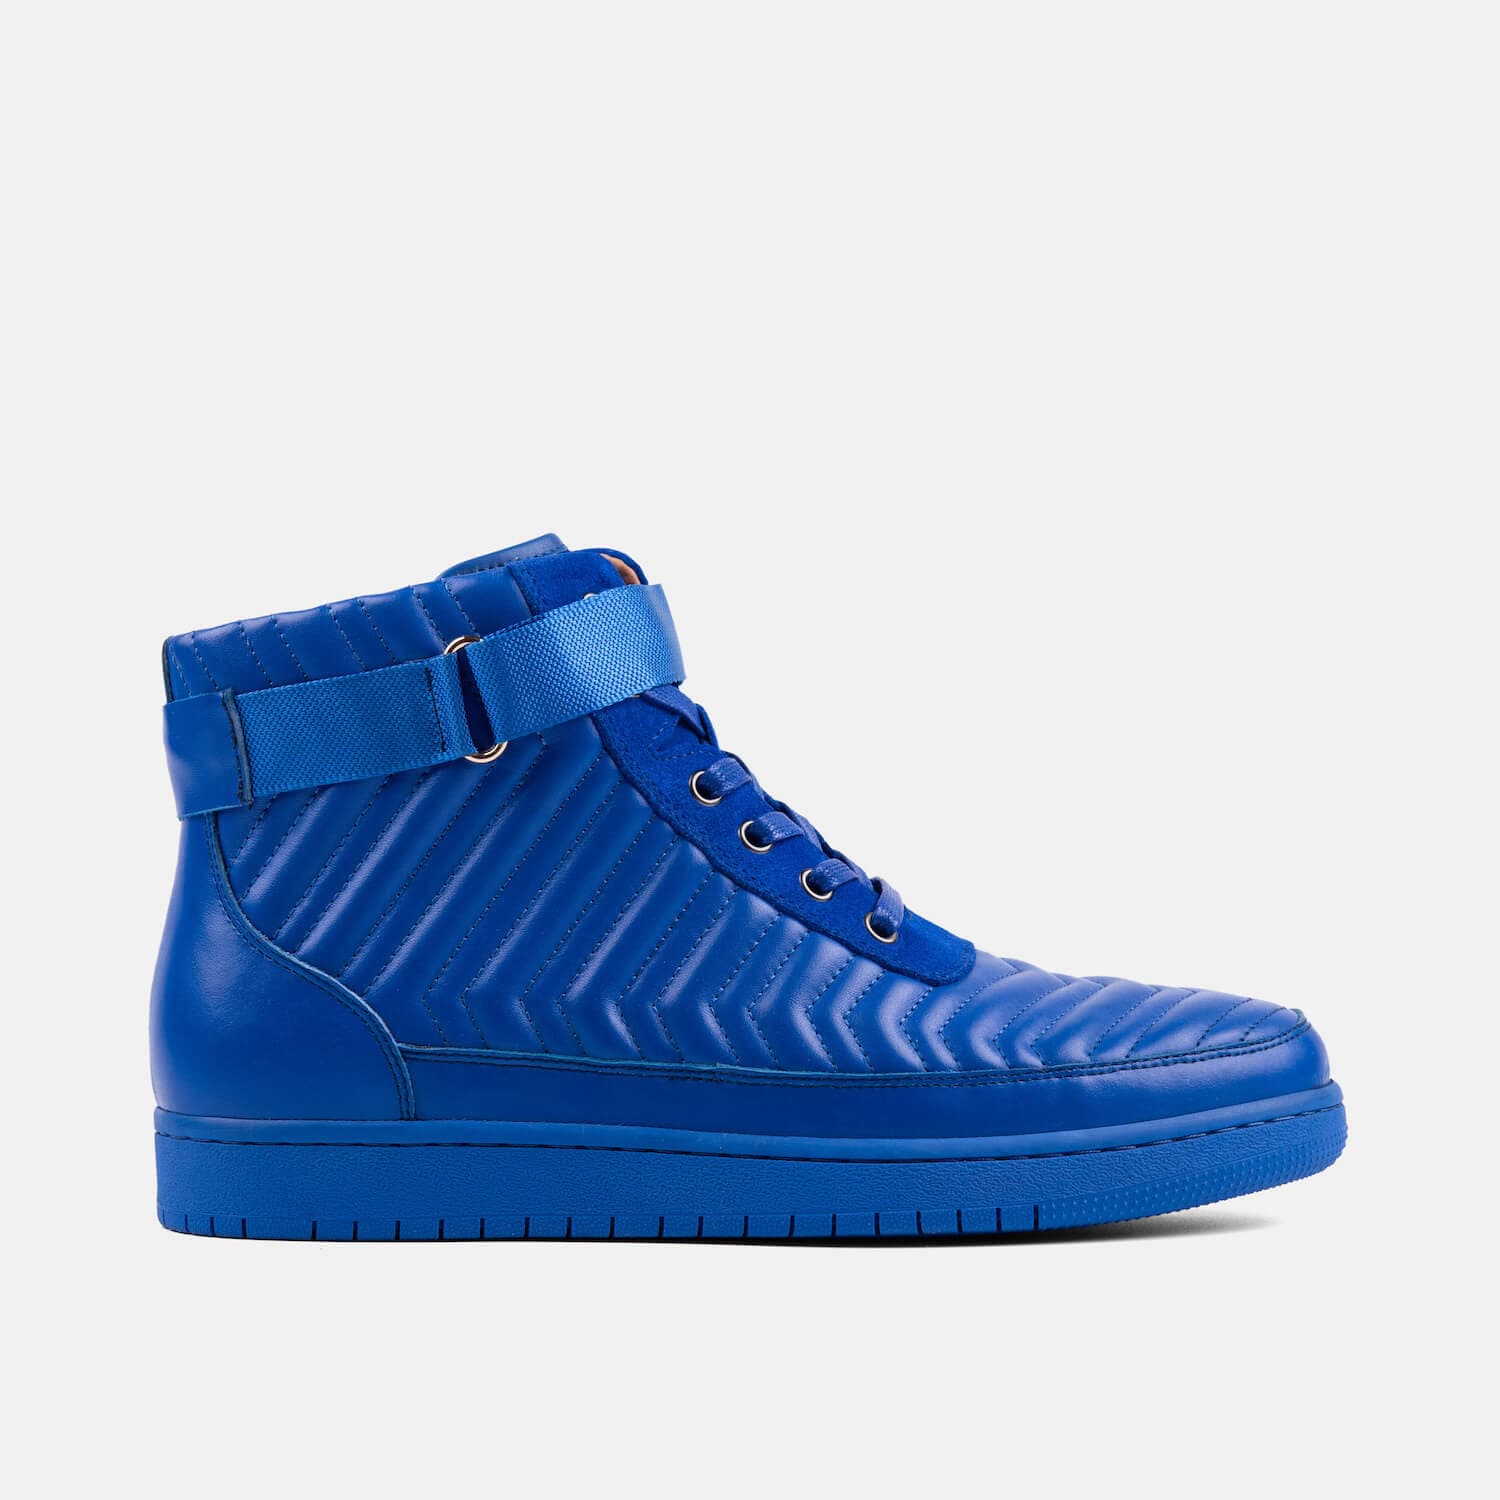 Yesler Brilliant Blue Leather High Top Sneakers